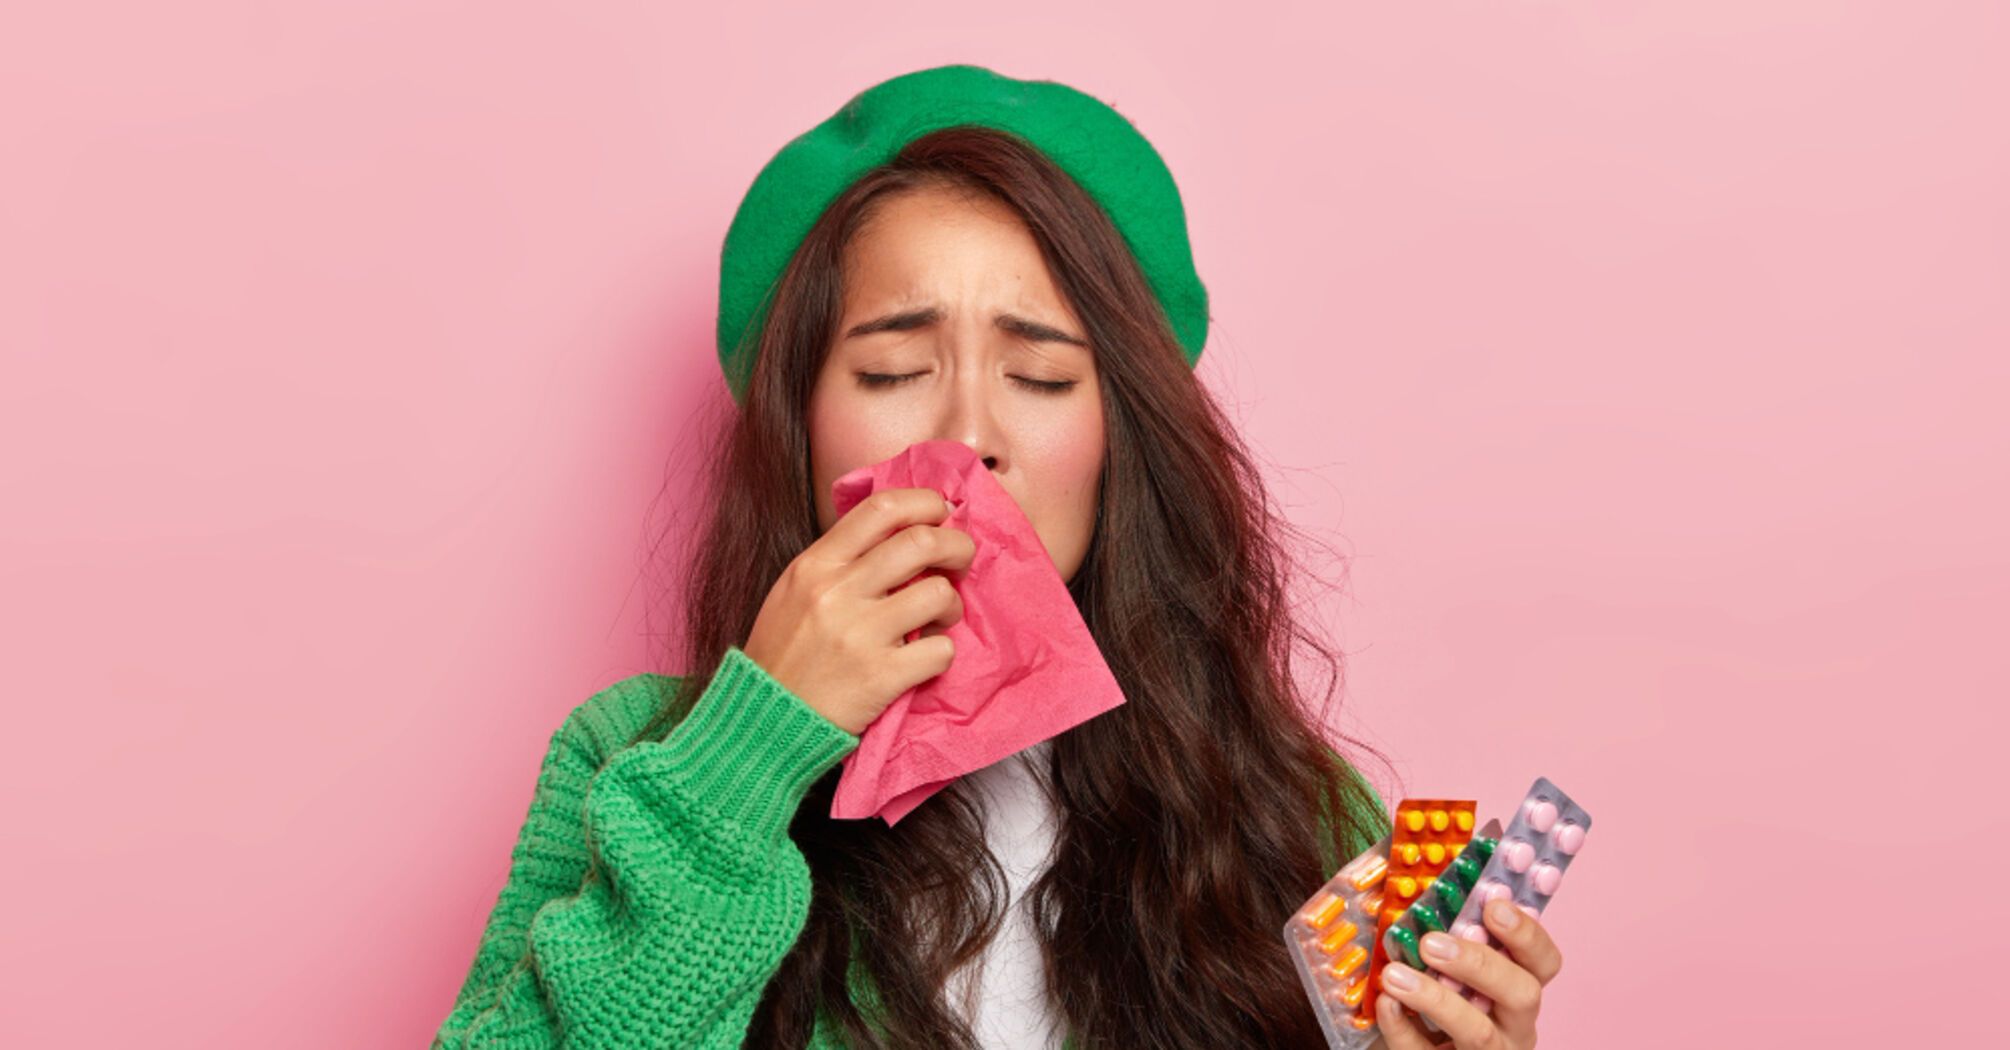 How to get rid of air sickness: tips from professionals